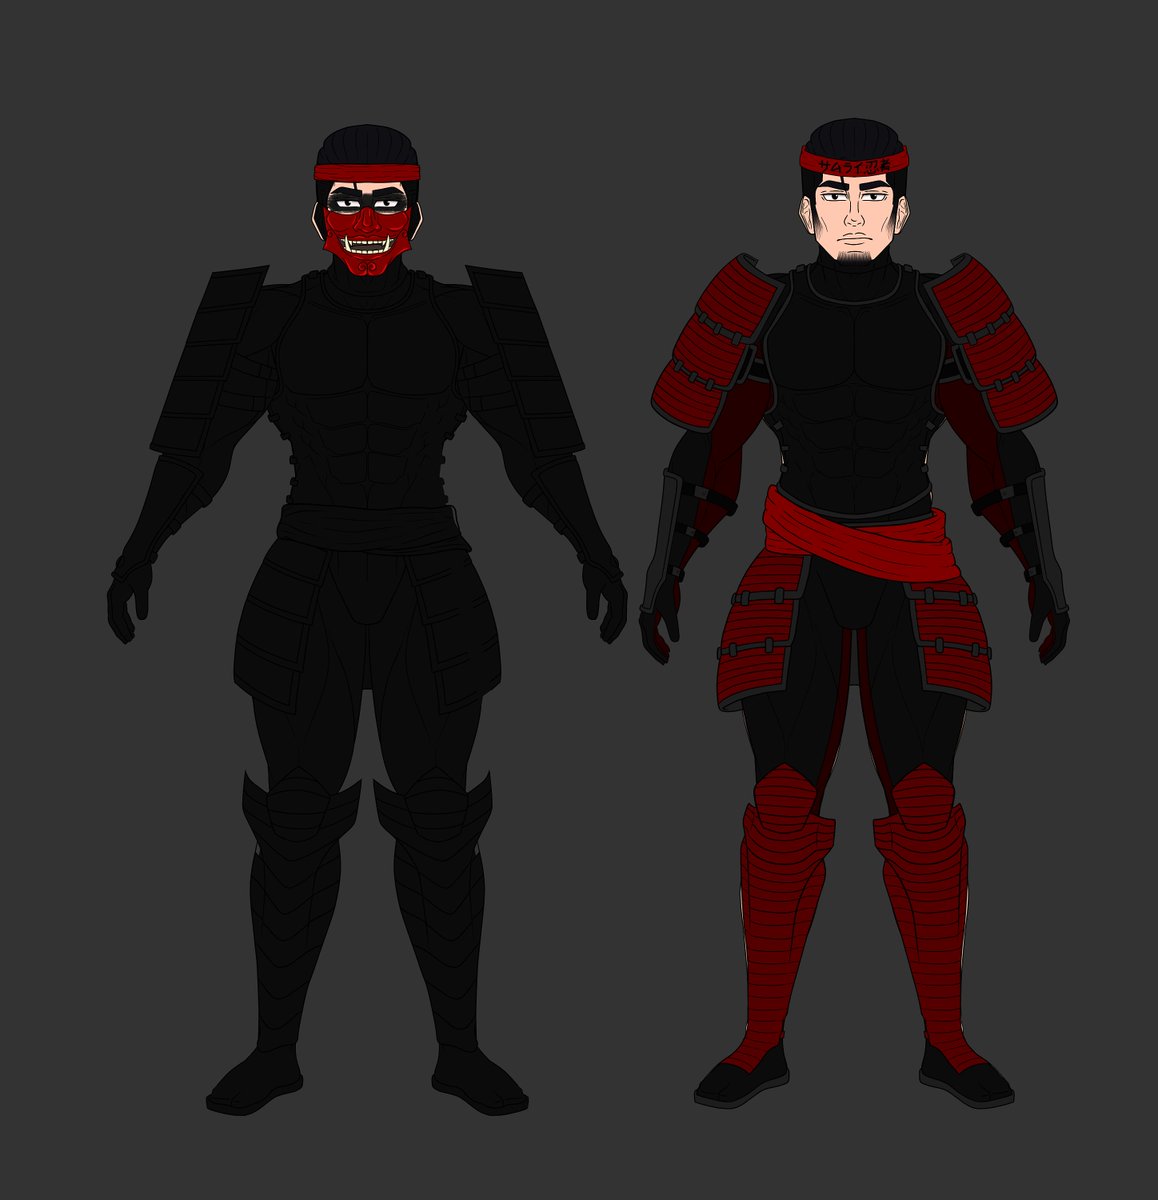 And here's a kind of Failed Re-Design sheet of Hajime/Samurai Ninja, the hero Suit's of samurai ninja I really hate and I don't like the basic pose I made for him. but here's the first Pic of him without his hero suit or any clothing and on what his body looks like.